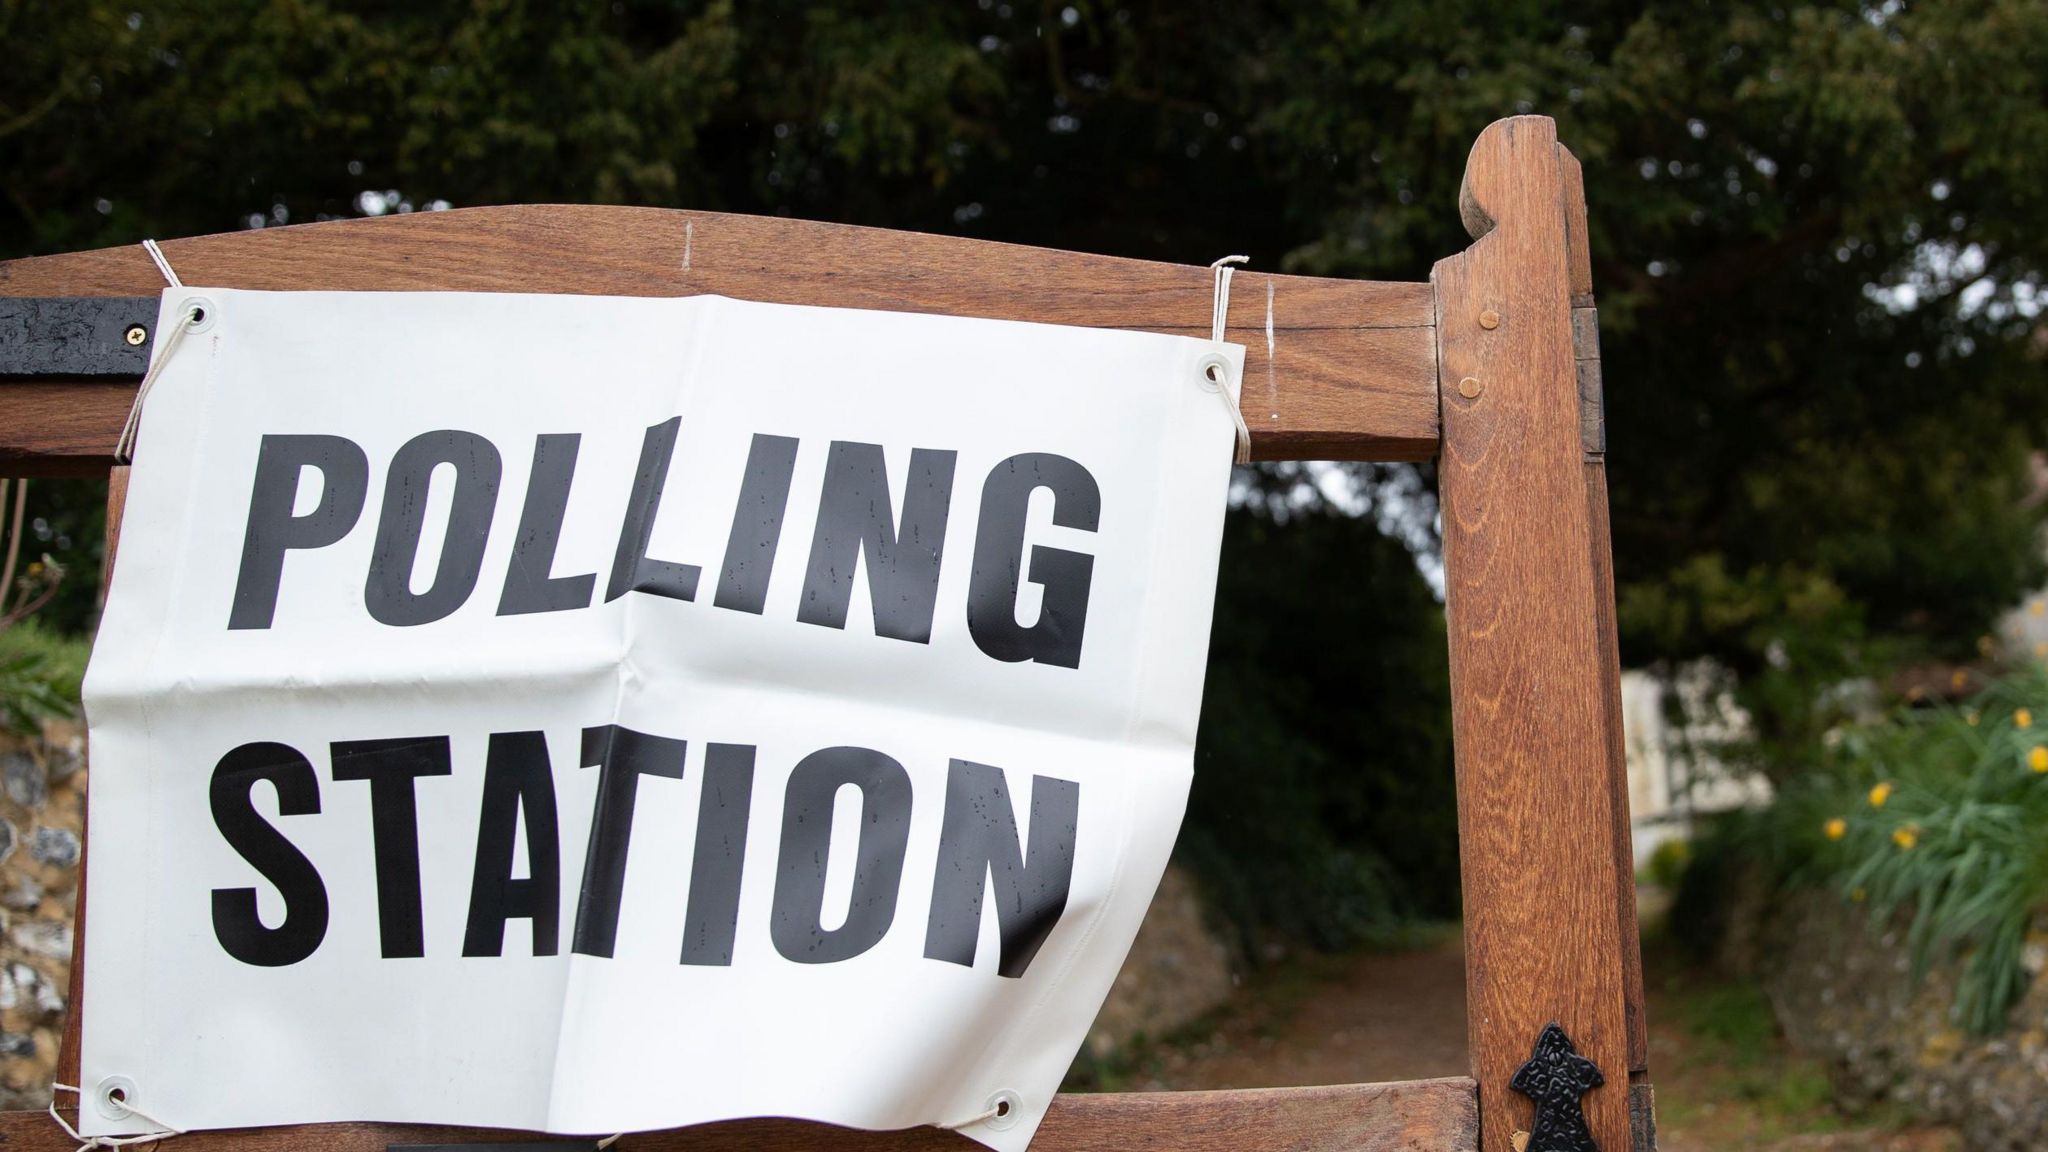 A white polling station sign tied to a wooden gate at the end of a narrow path.